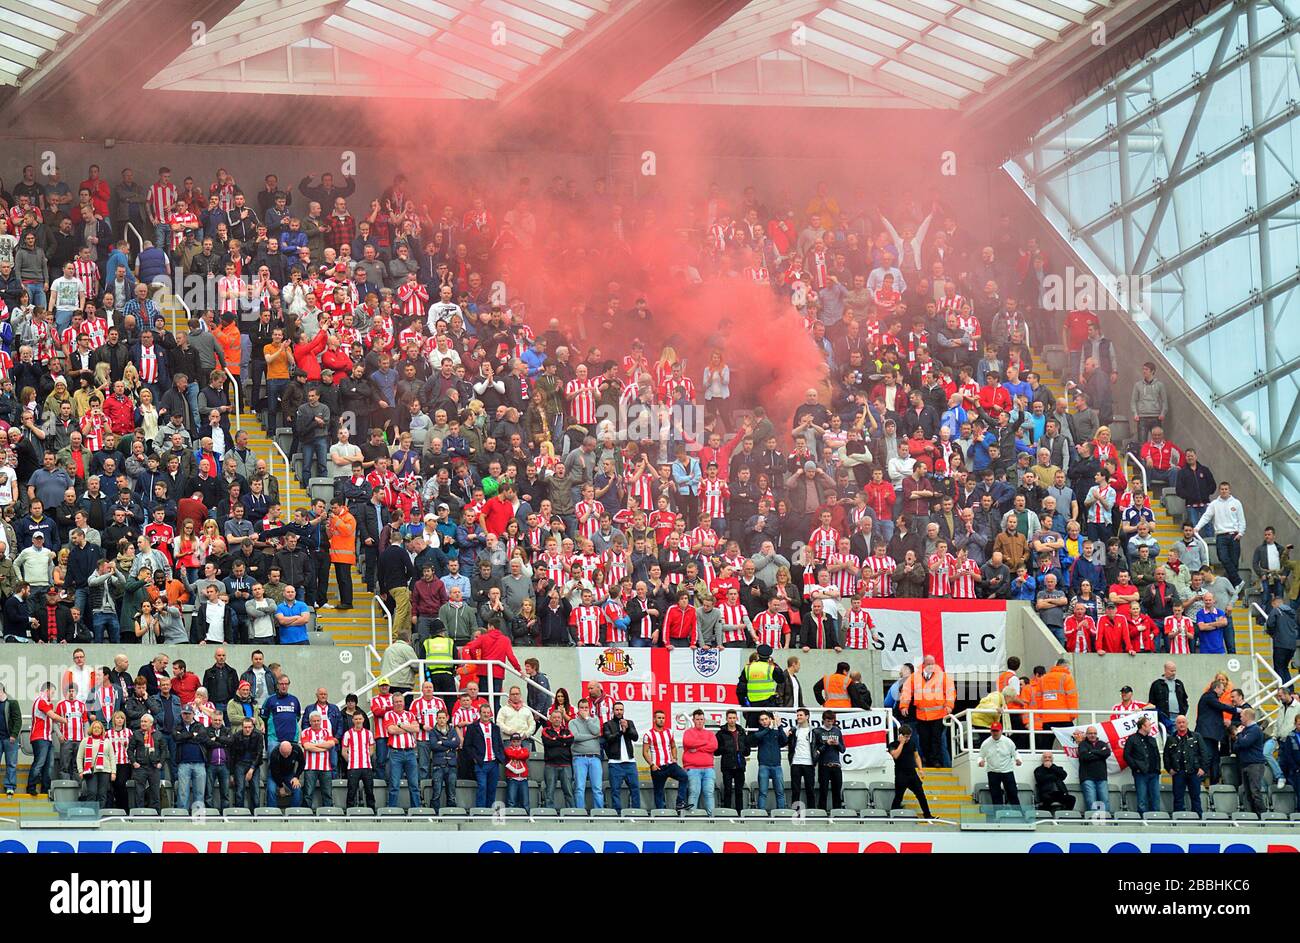 Red smoke drifts up above the Sunderland fans as they cheer on their side in the stands Stock Photo